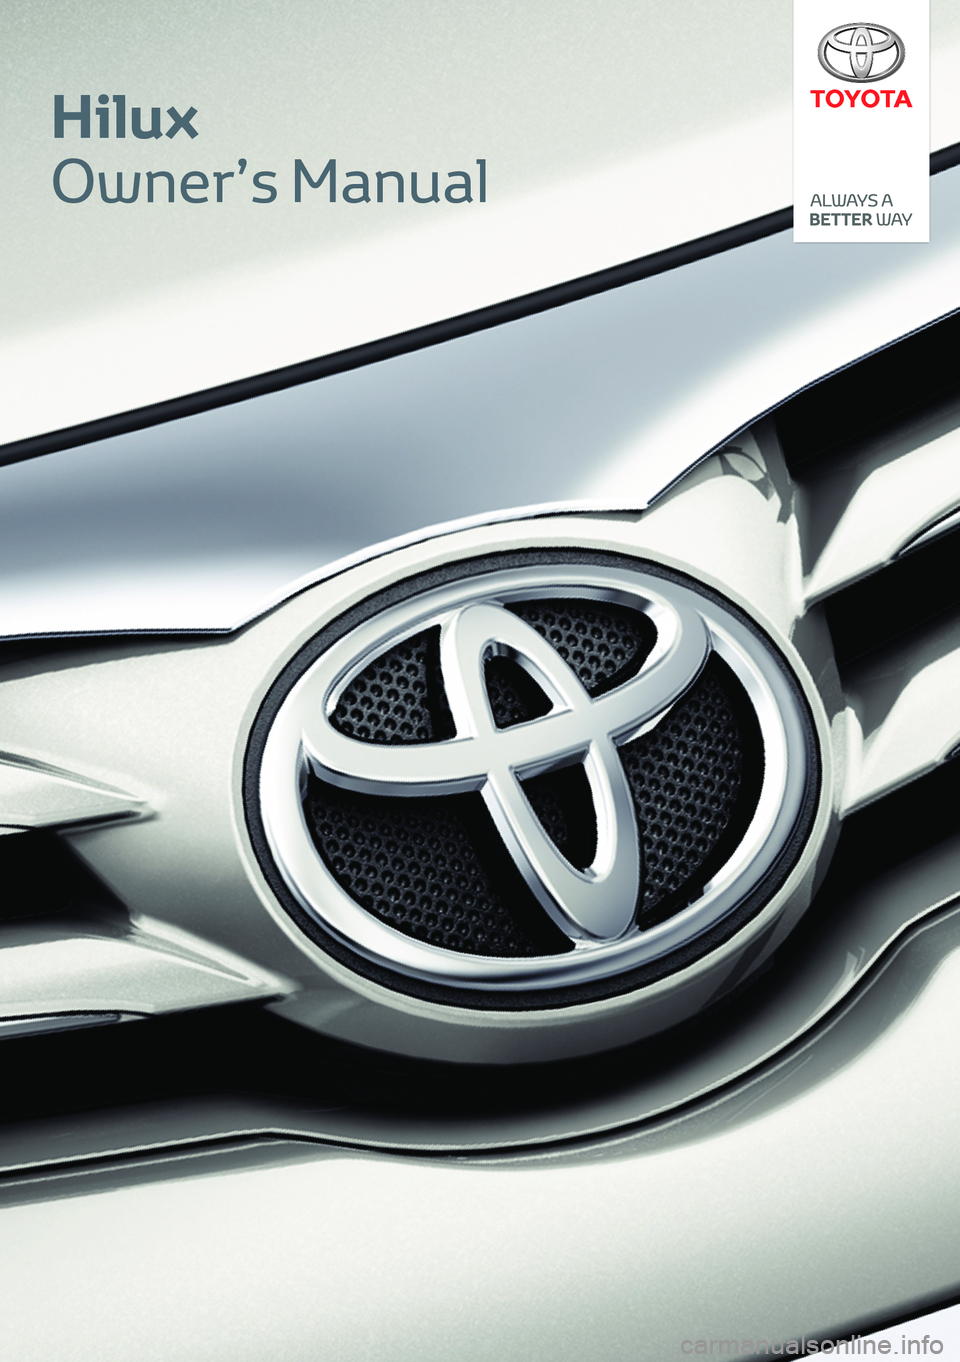 TOYOTA HILUX 2021  Notices Demploi (in French) Hilux
Owner’s Manual 